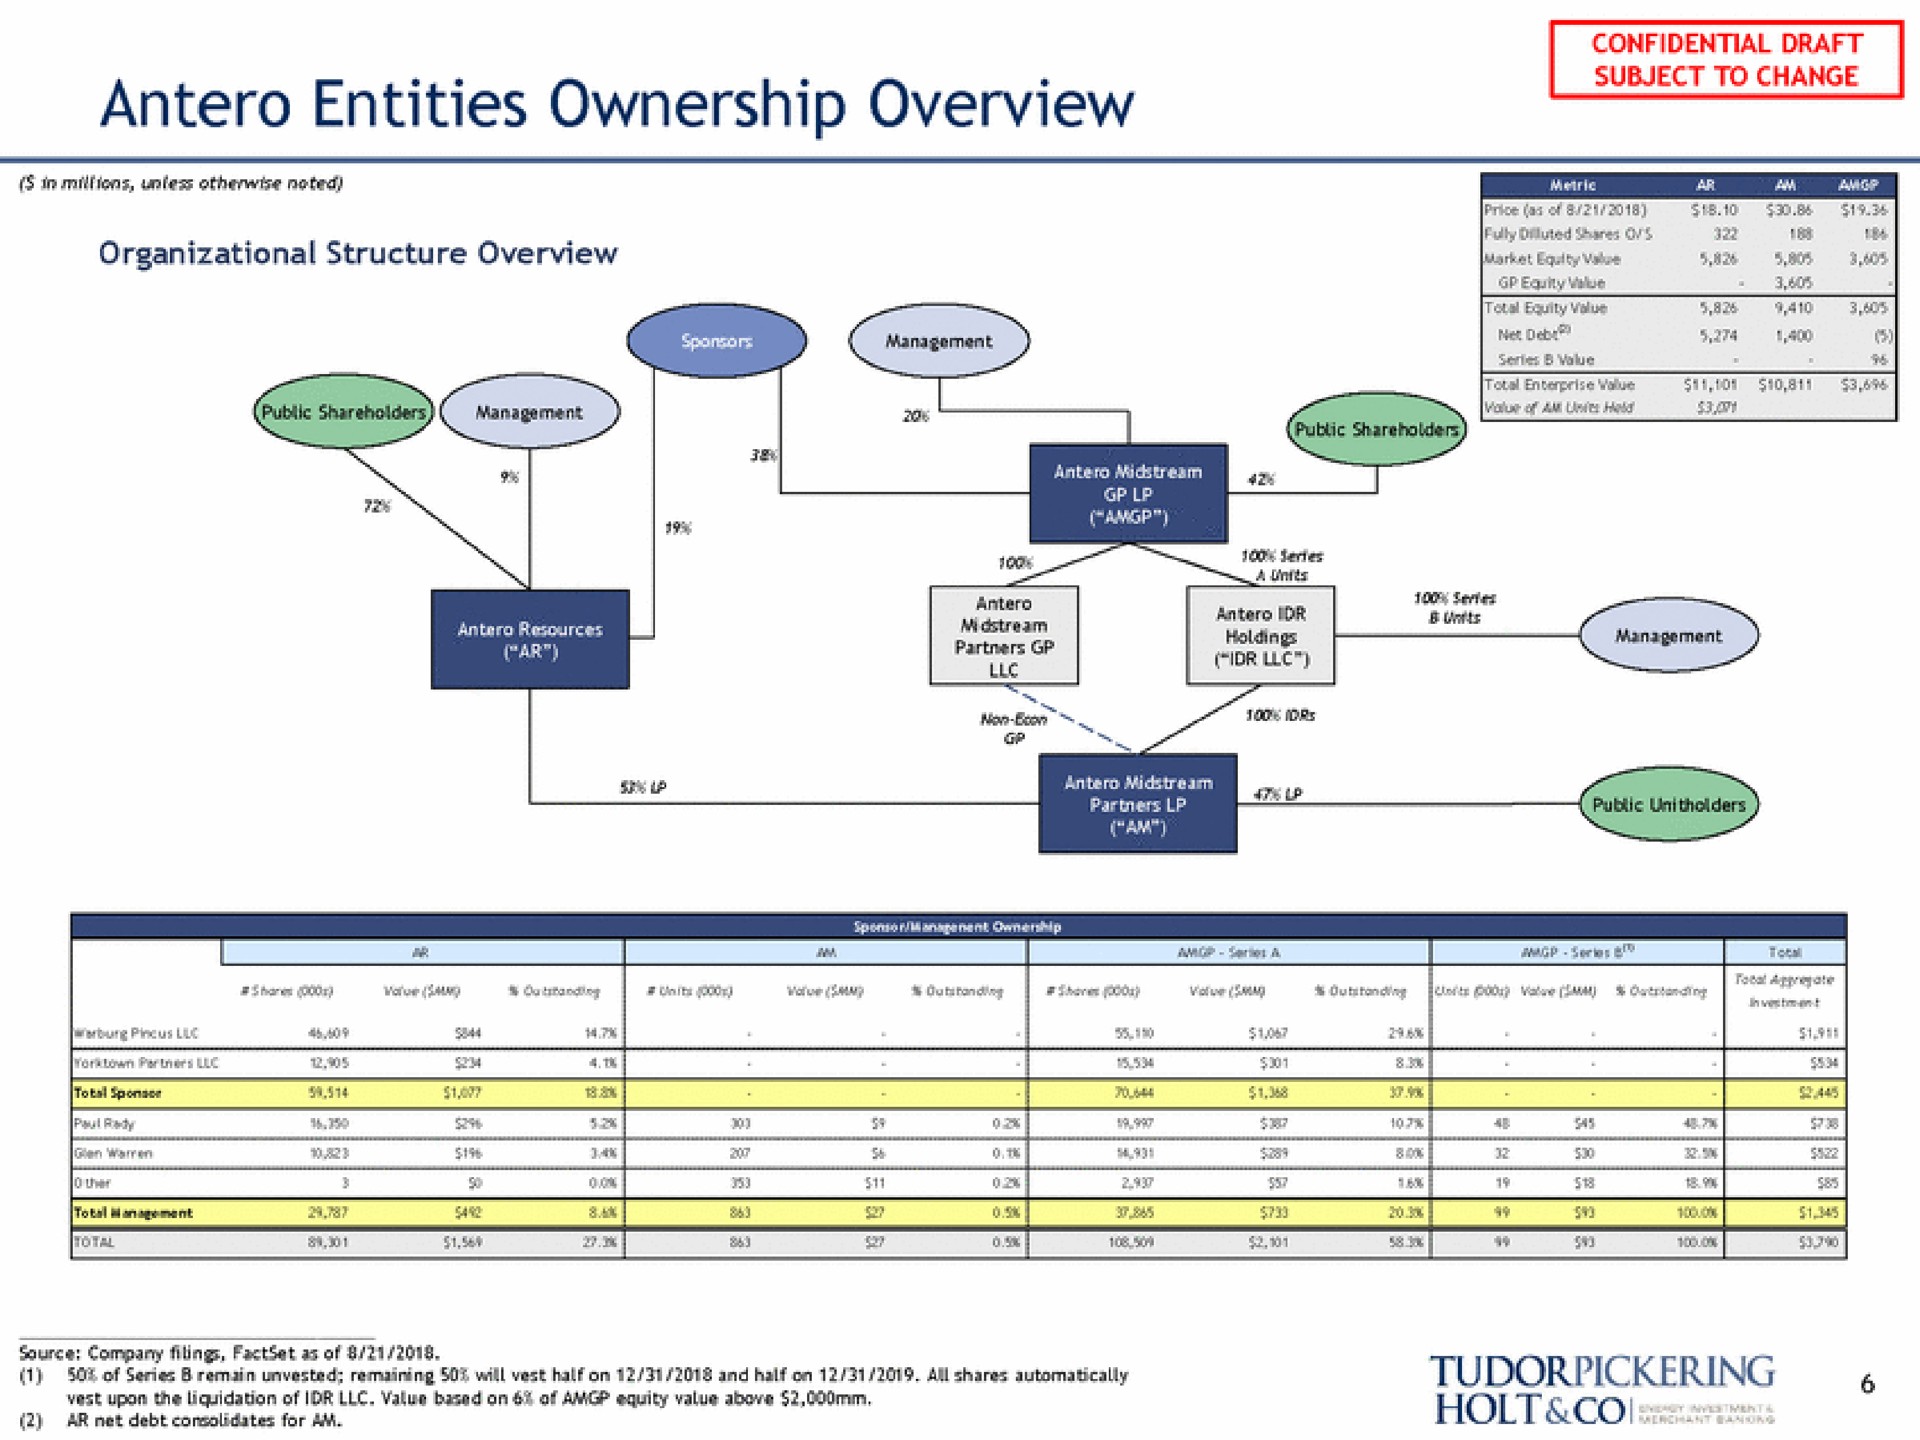 entities ownership overview tate seems fora a | Tudor, Pickering, Holt & Co